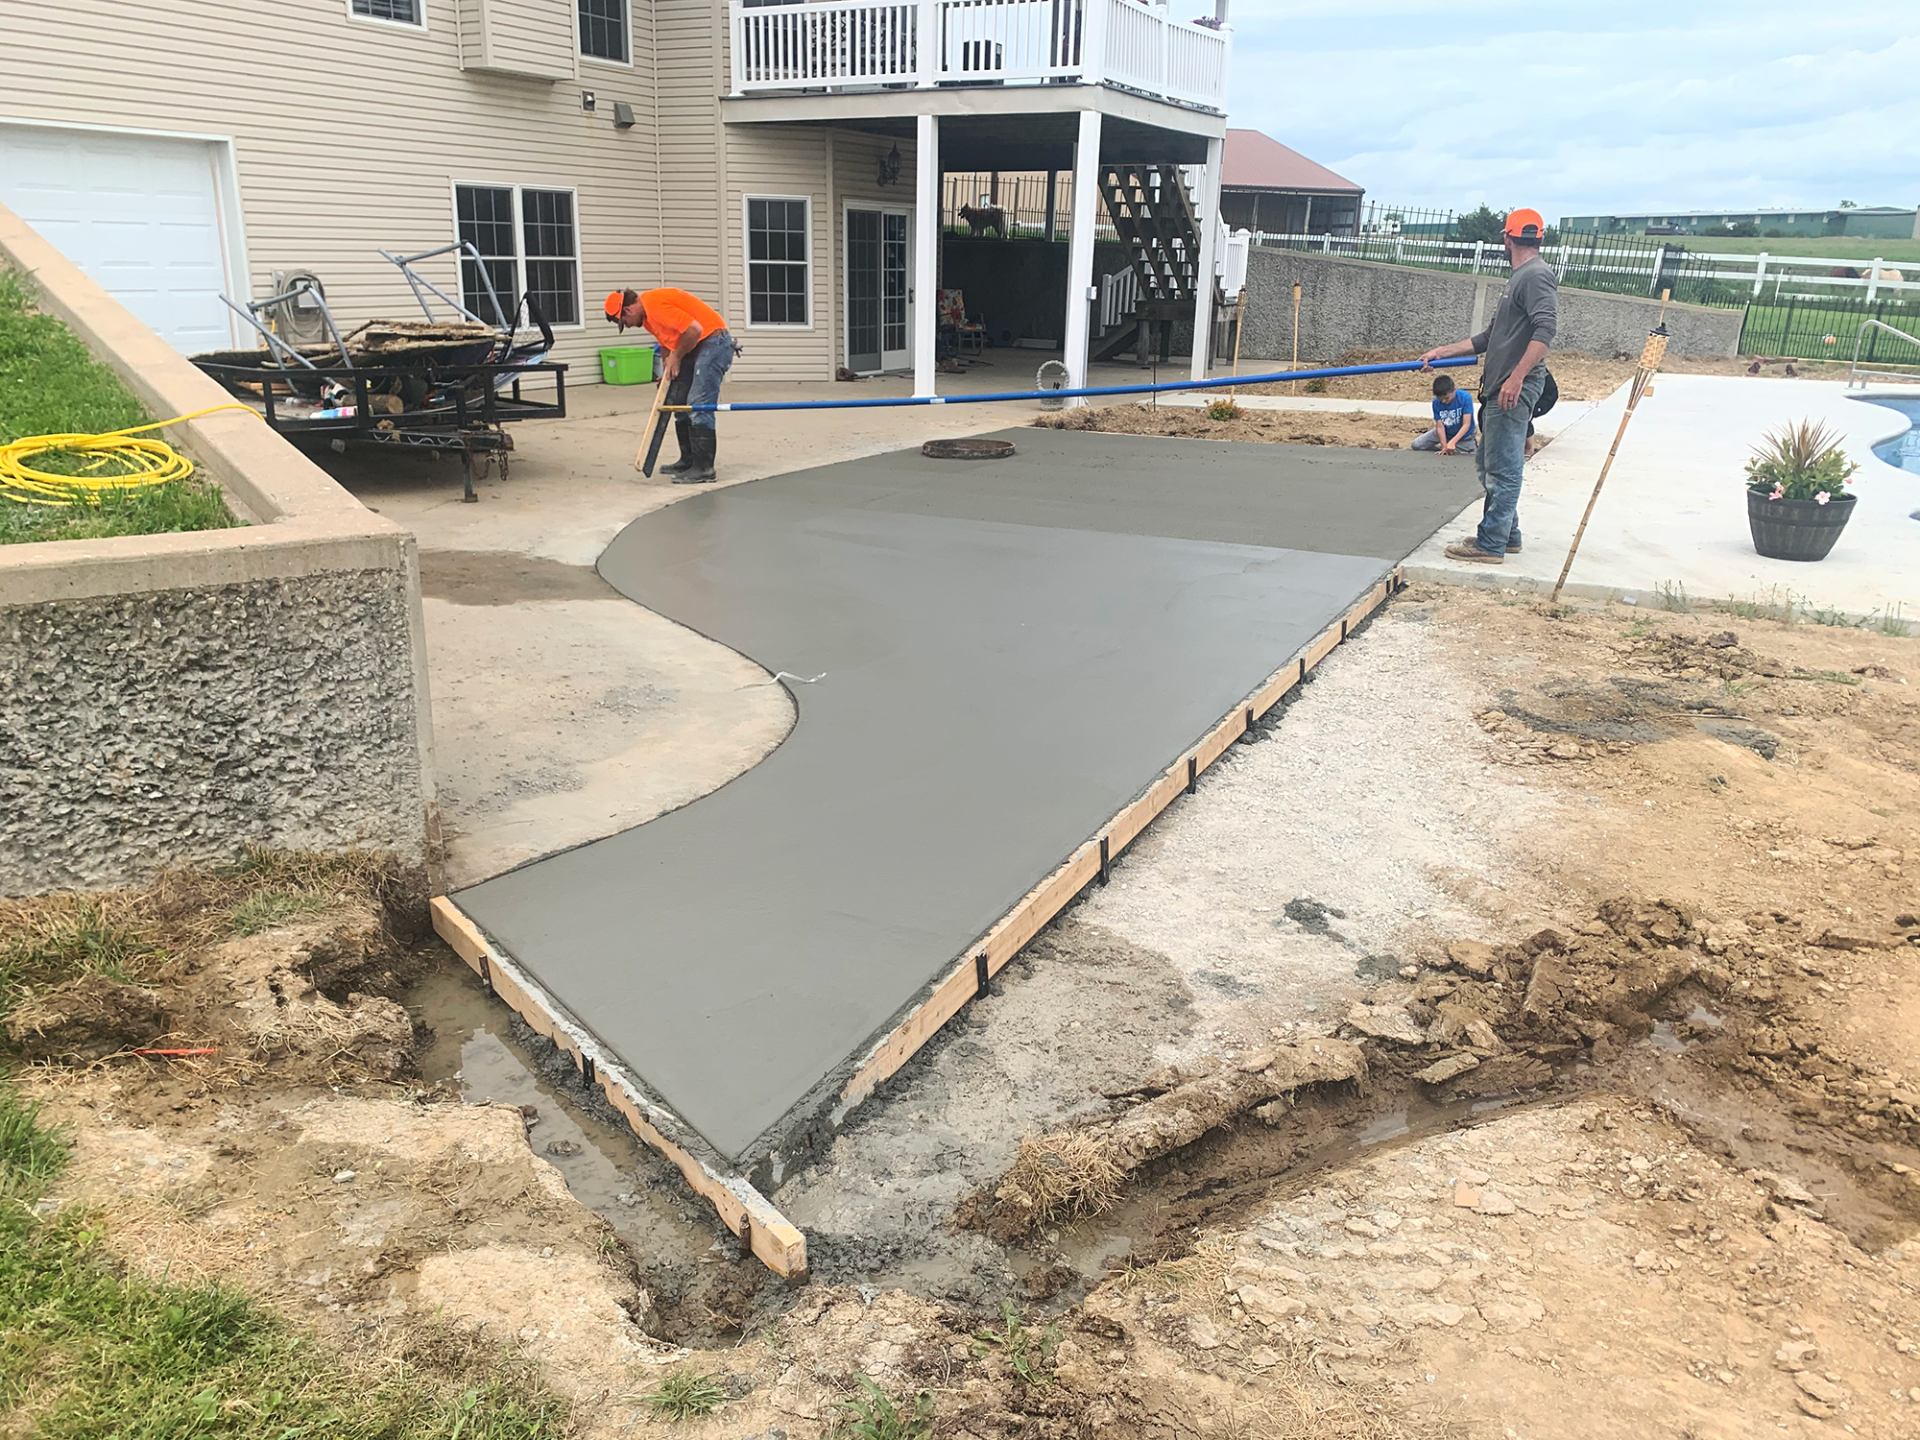 MoSEAL Knows Paving Your Driveway in Centralia, MO Is One of the Most Important Choices You Can Make.